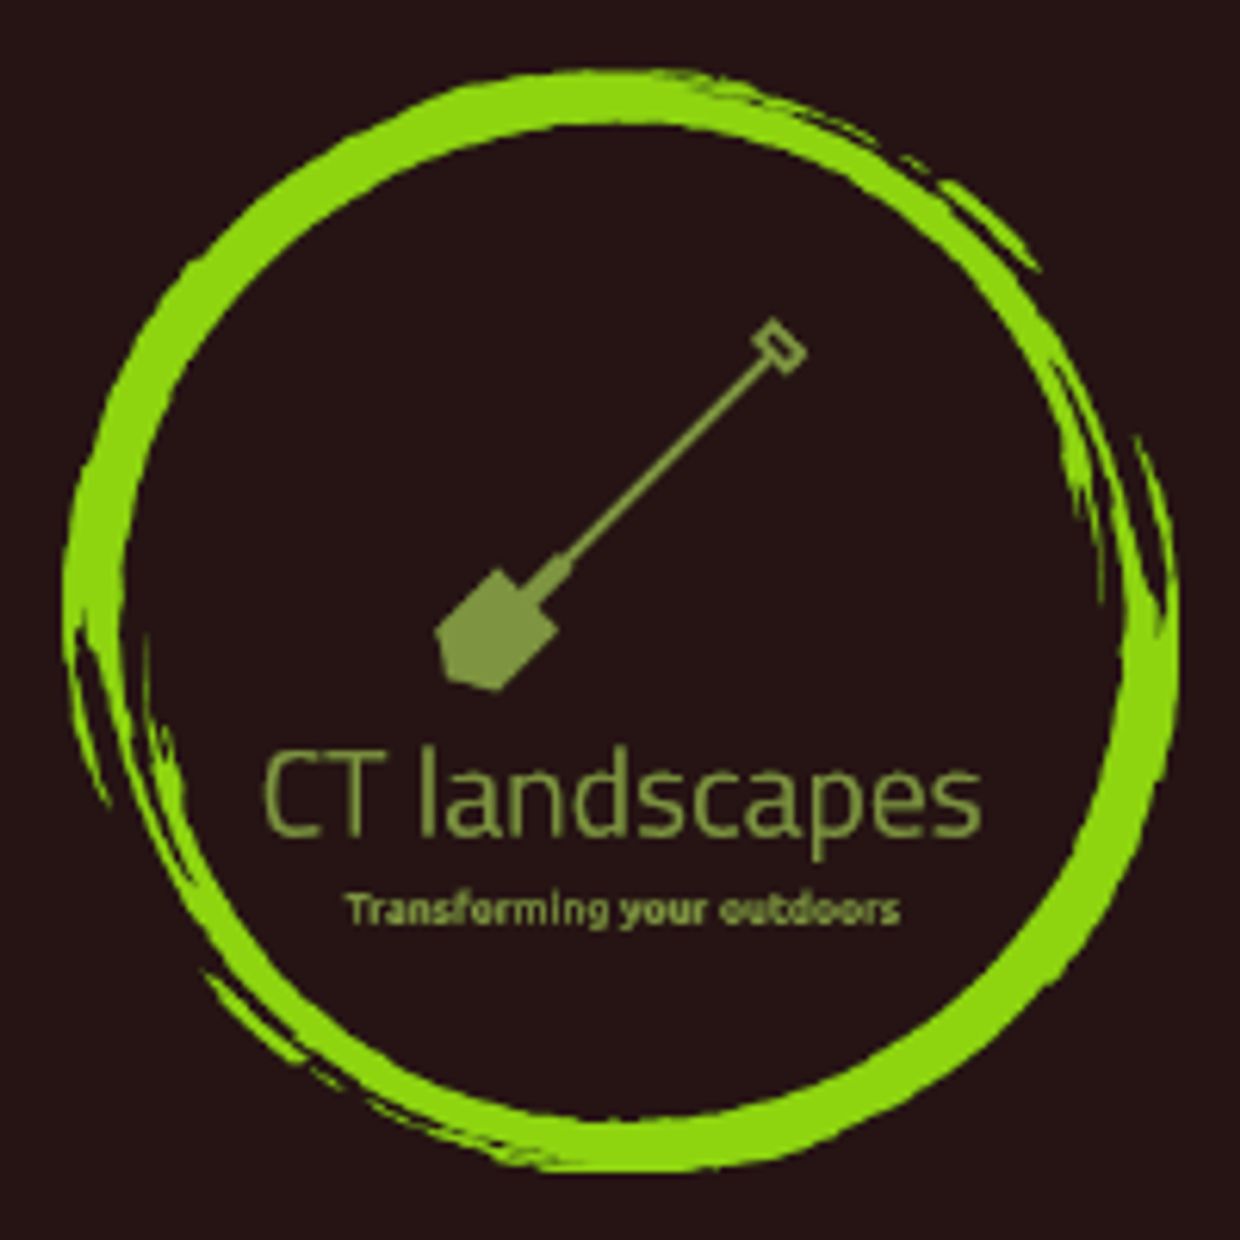 Ct landscapes and driveways 